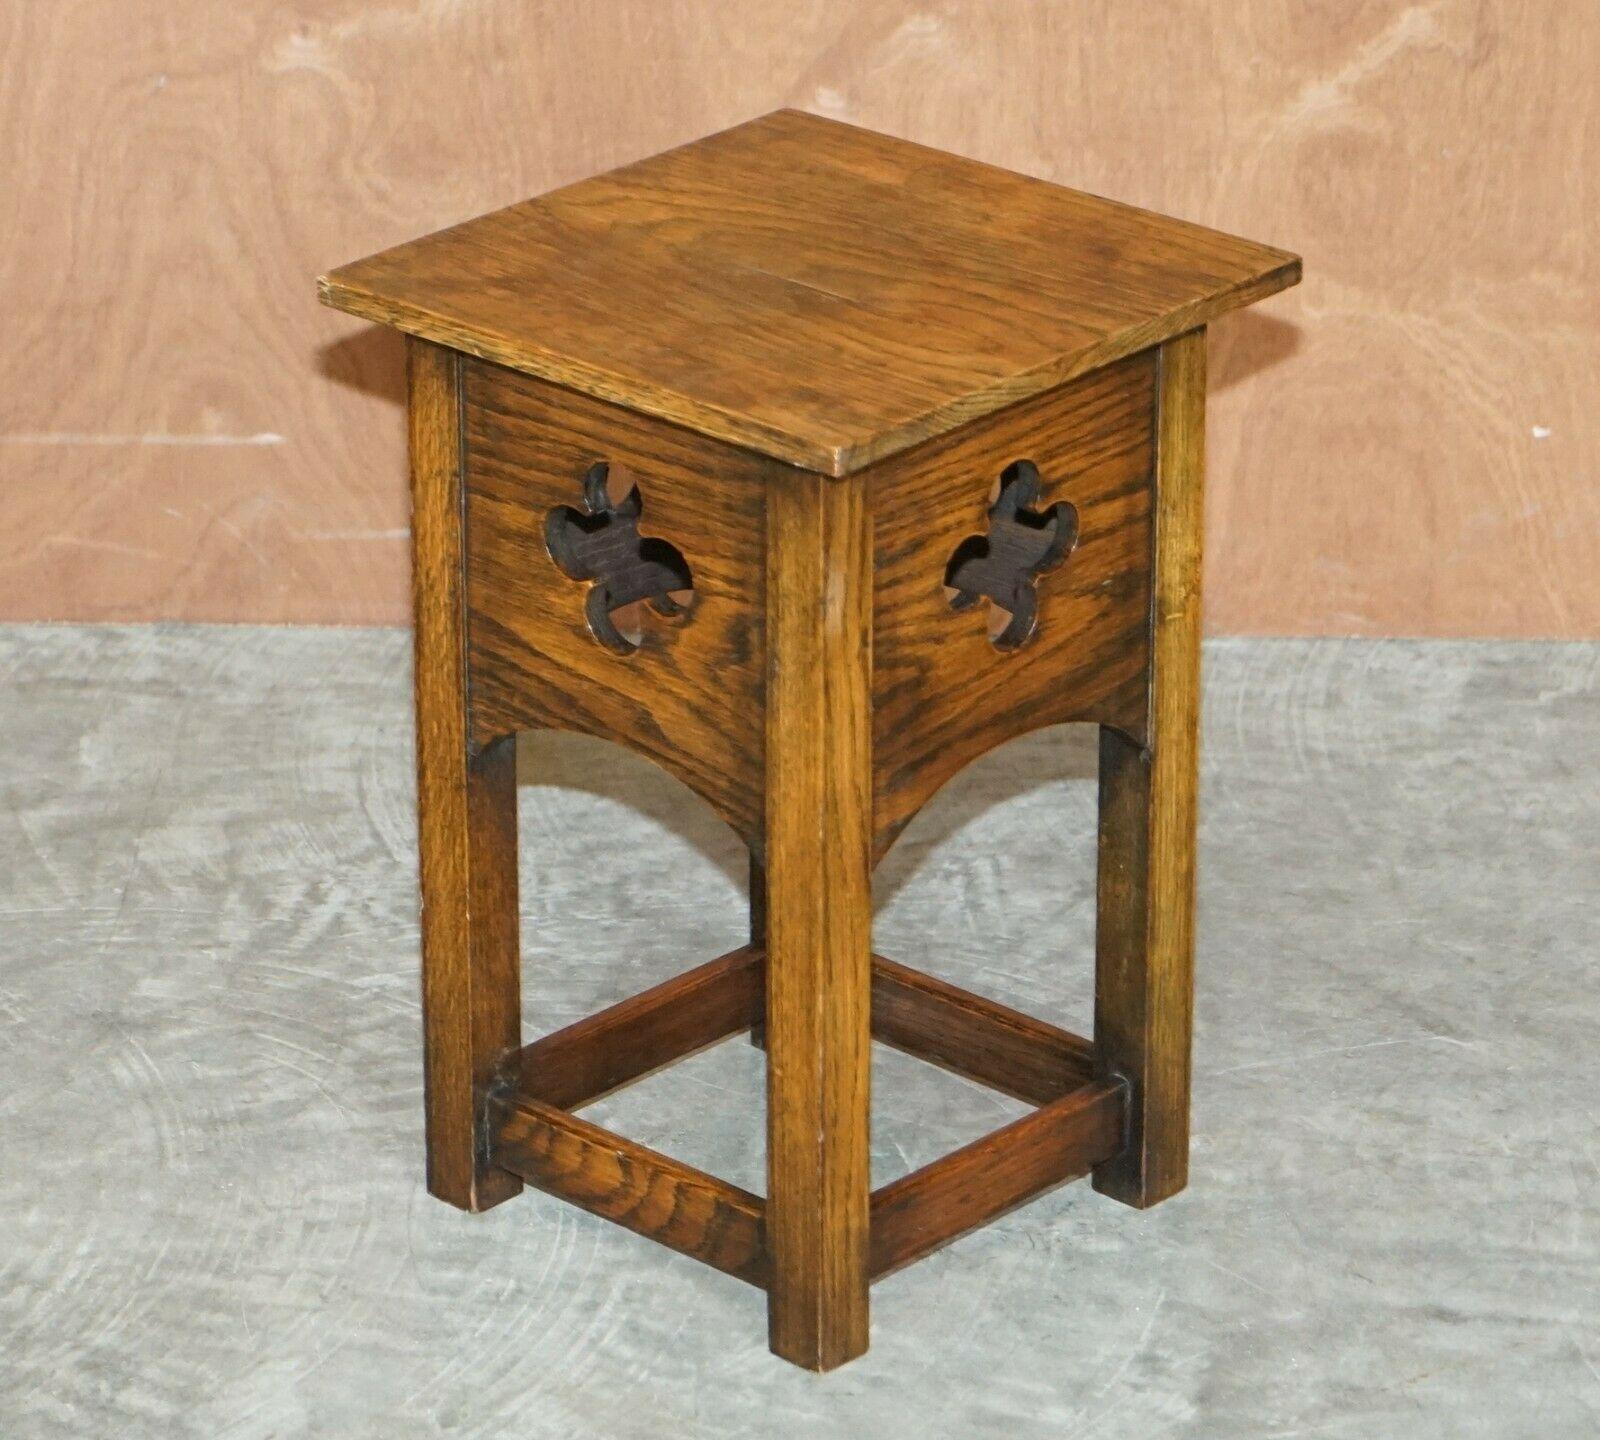 We are delighted to offer for sale this lovely vintage English Oak Arts & Crafts side table

A good looking and well made piece, the timber patina is natural and unpolished, it has a nice rich warm glow to it

Condition wise we have deep cleaned